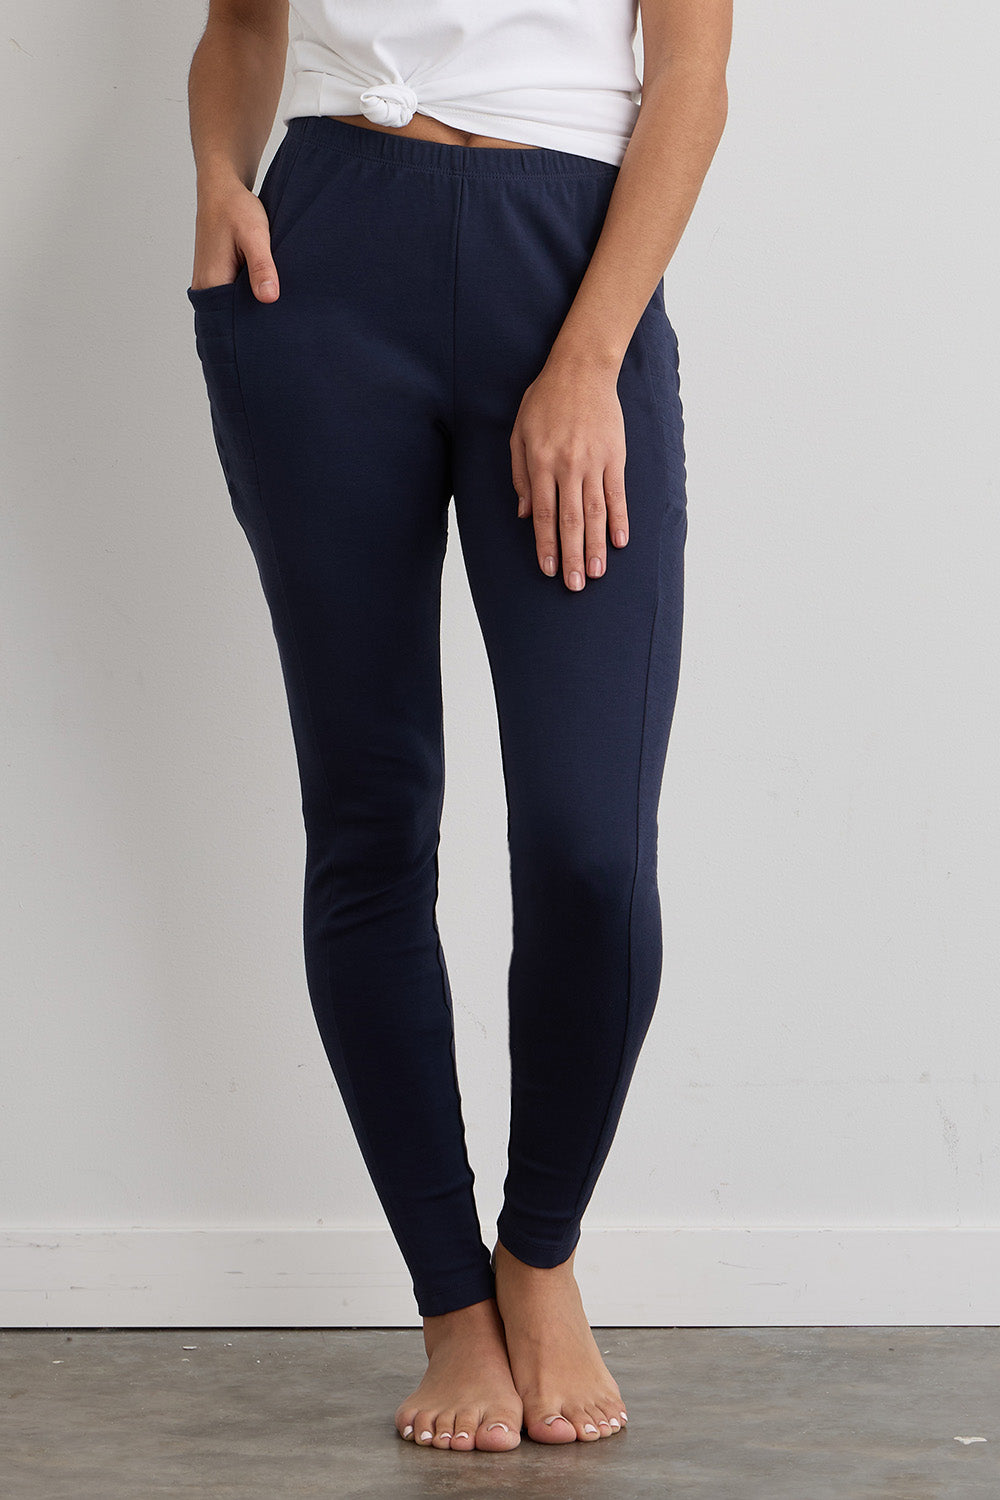 Women's On The Go-to Pocket Legging made with Organic Cotton | Pact